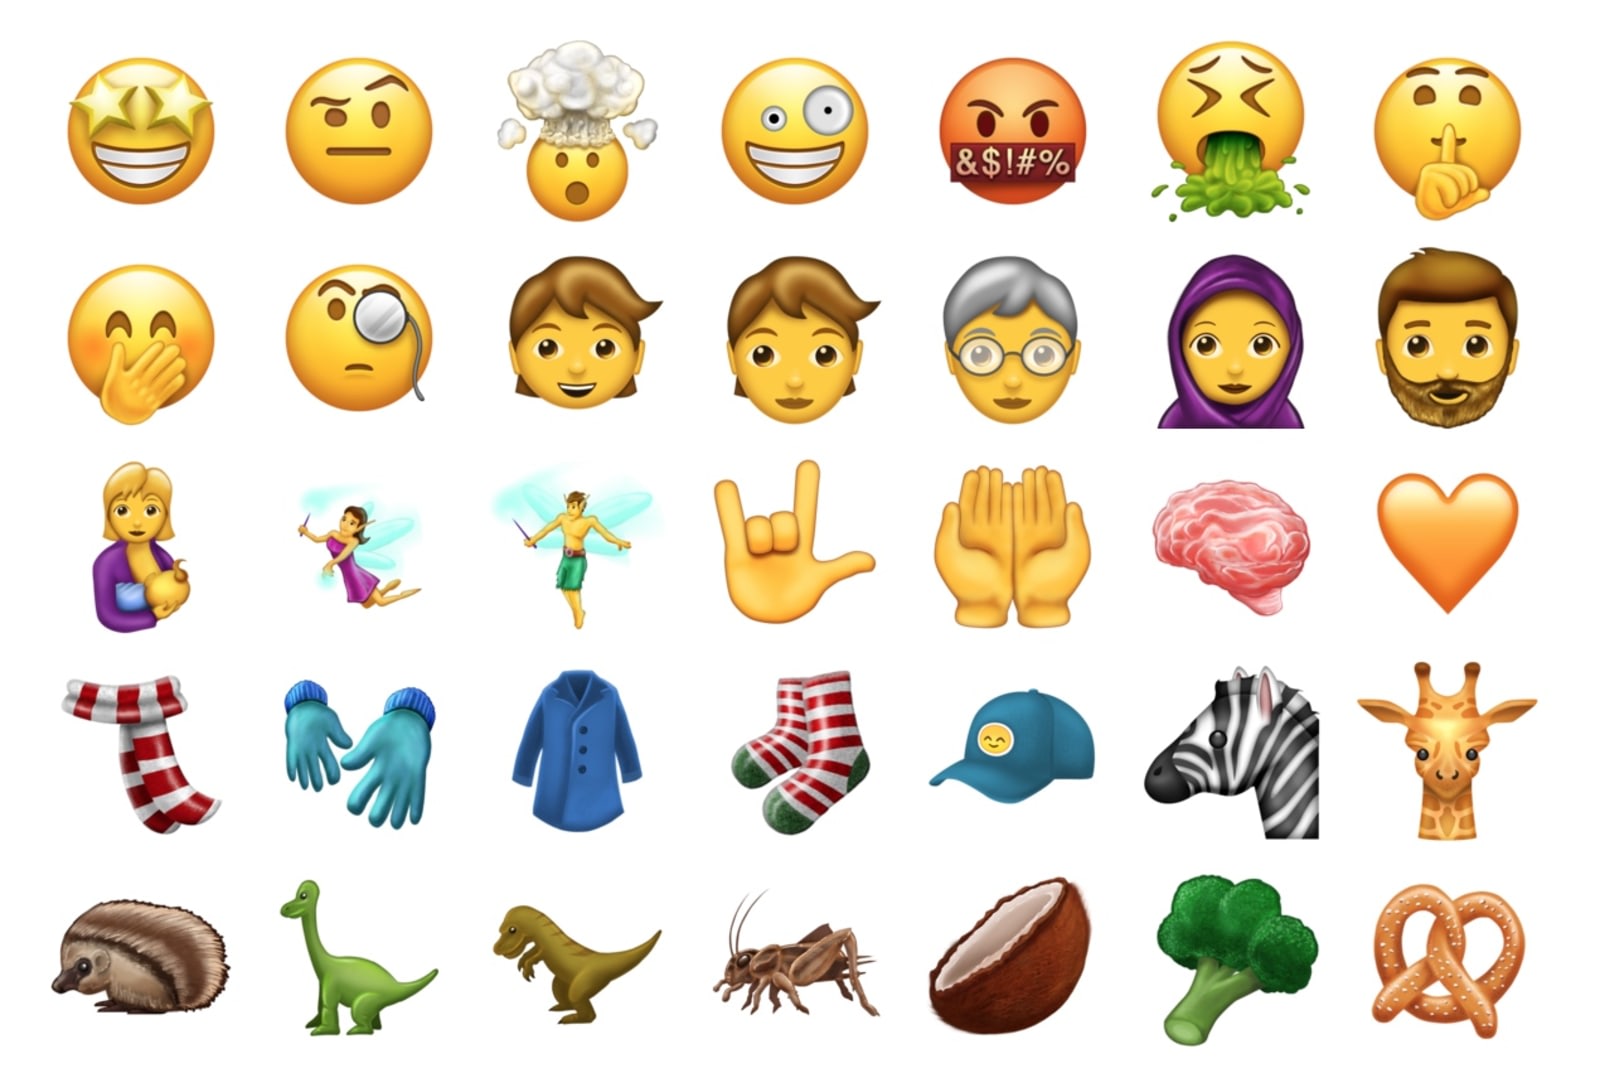 48 new emojis are coming to your phone this summer